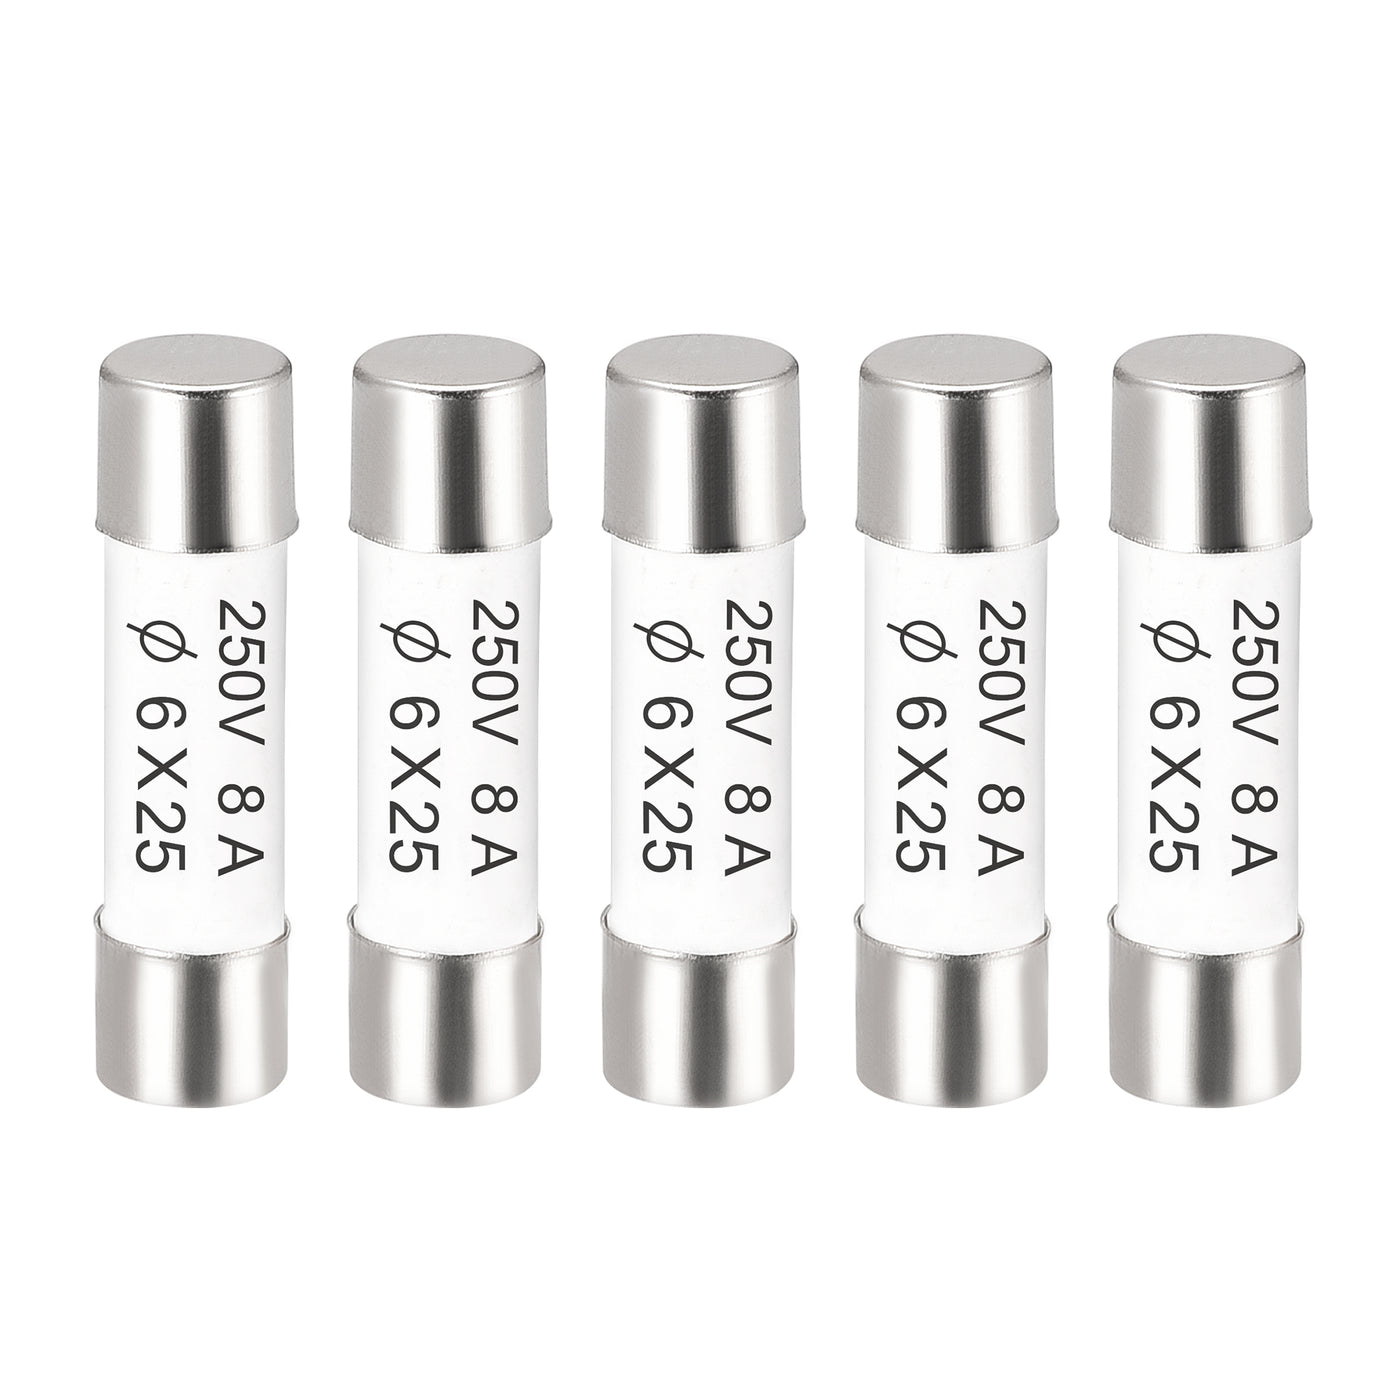 uxcell Uxcell Ceramic Cartridge Fuses 8A 250V 6x25mm Fast Blow for Energy Saving Lamp 5pcs